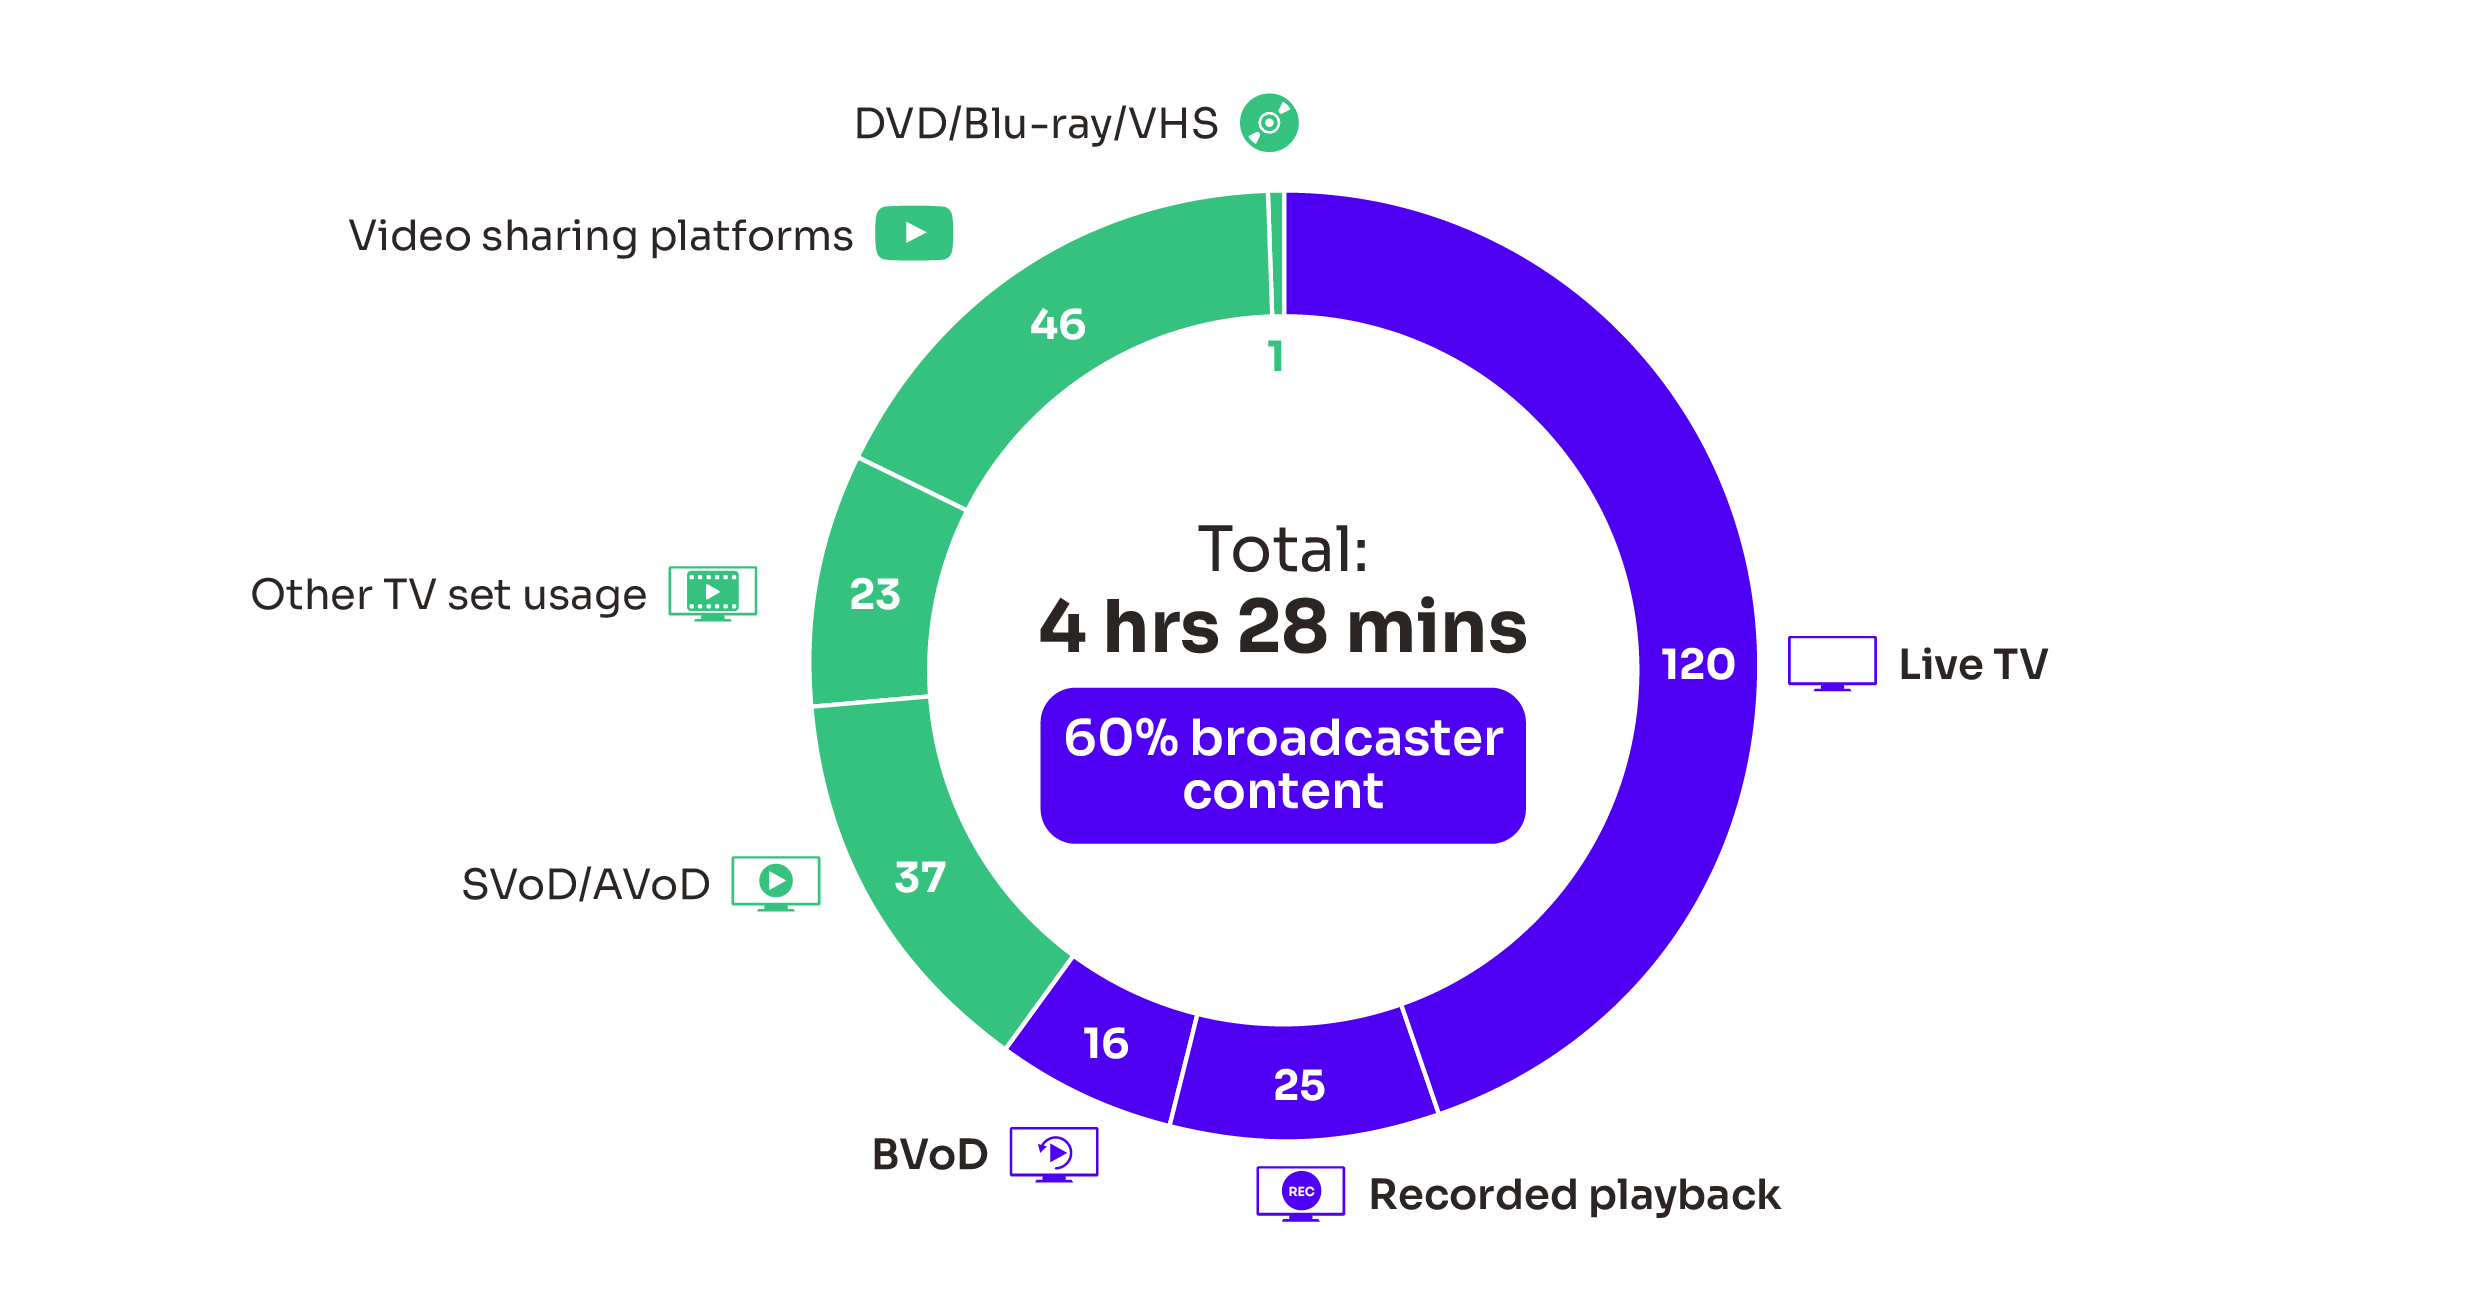 Average minutes of viewing per day - Live TV, Recorded playback, BVOD, SVOD/AVOD, Other TV set usage, Video sharing platforms, DVD/Blu-ray/VHS - UK - 2022